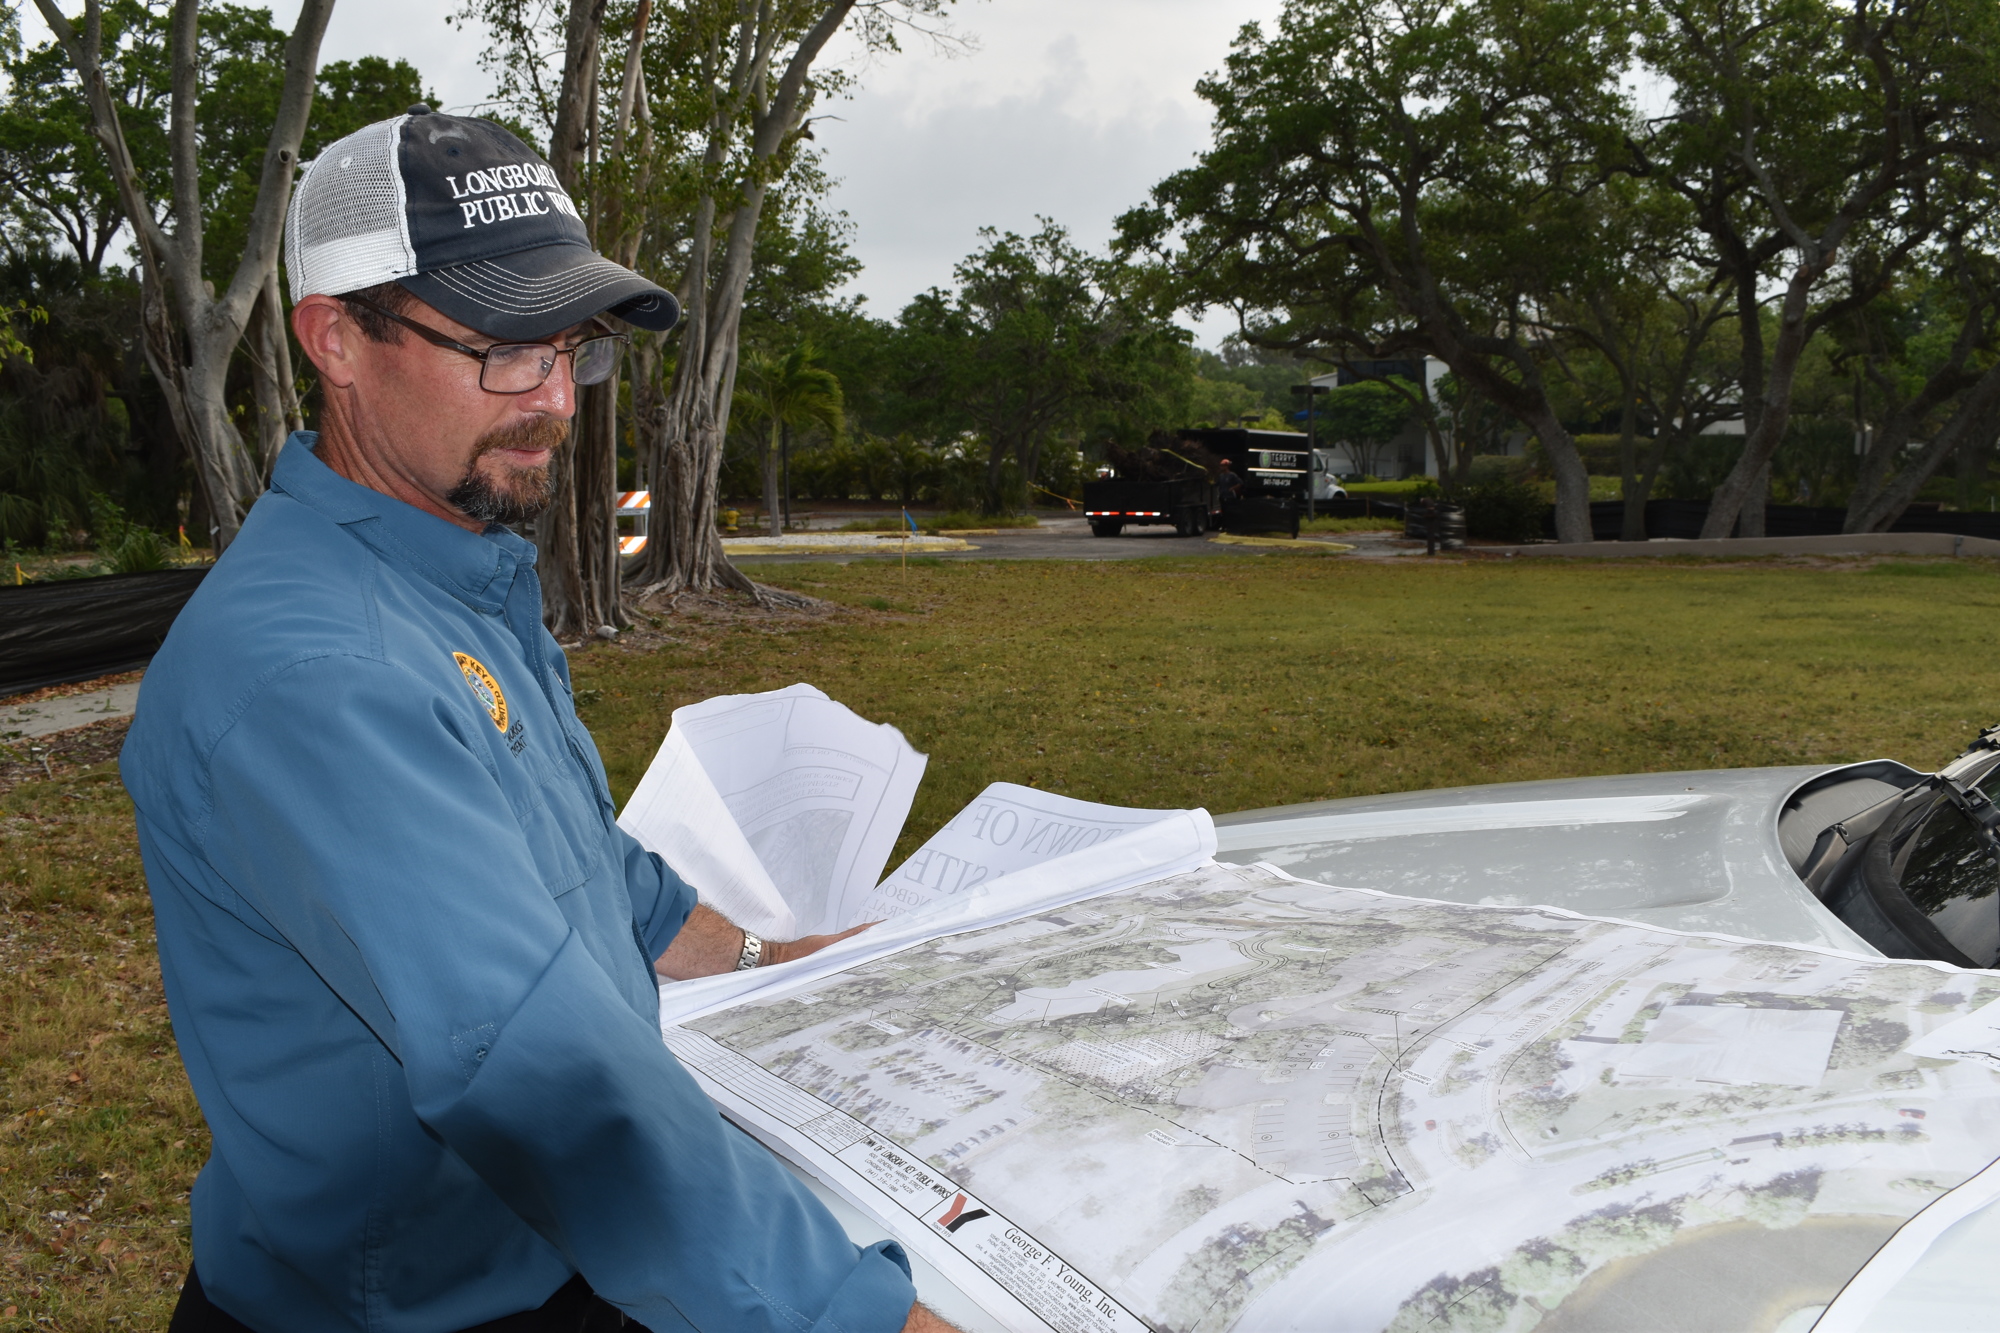 Longboat Key town projects manager Charlie Mopps said outdoor improvements to the Town Center Green site is expected to be completed by late summer.